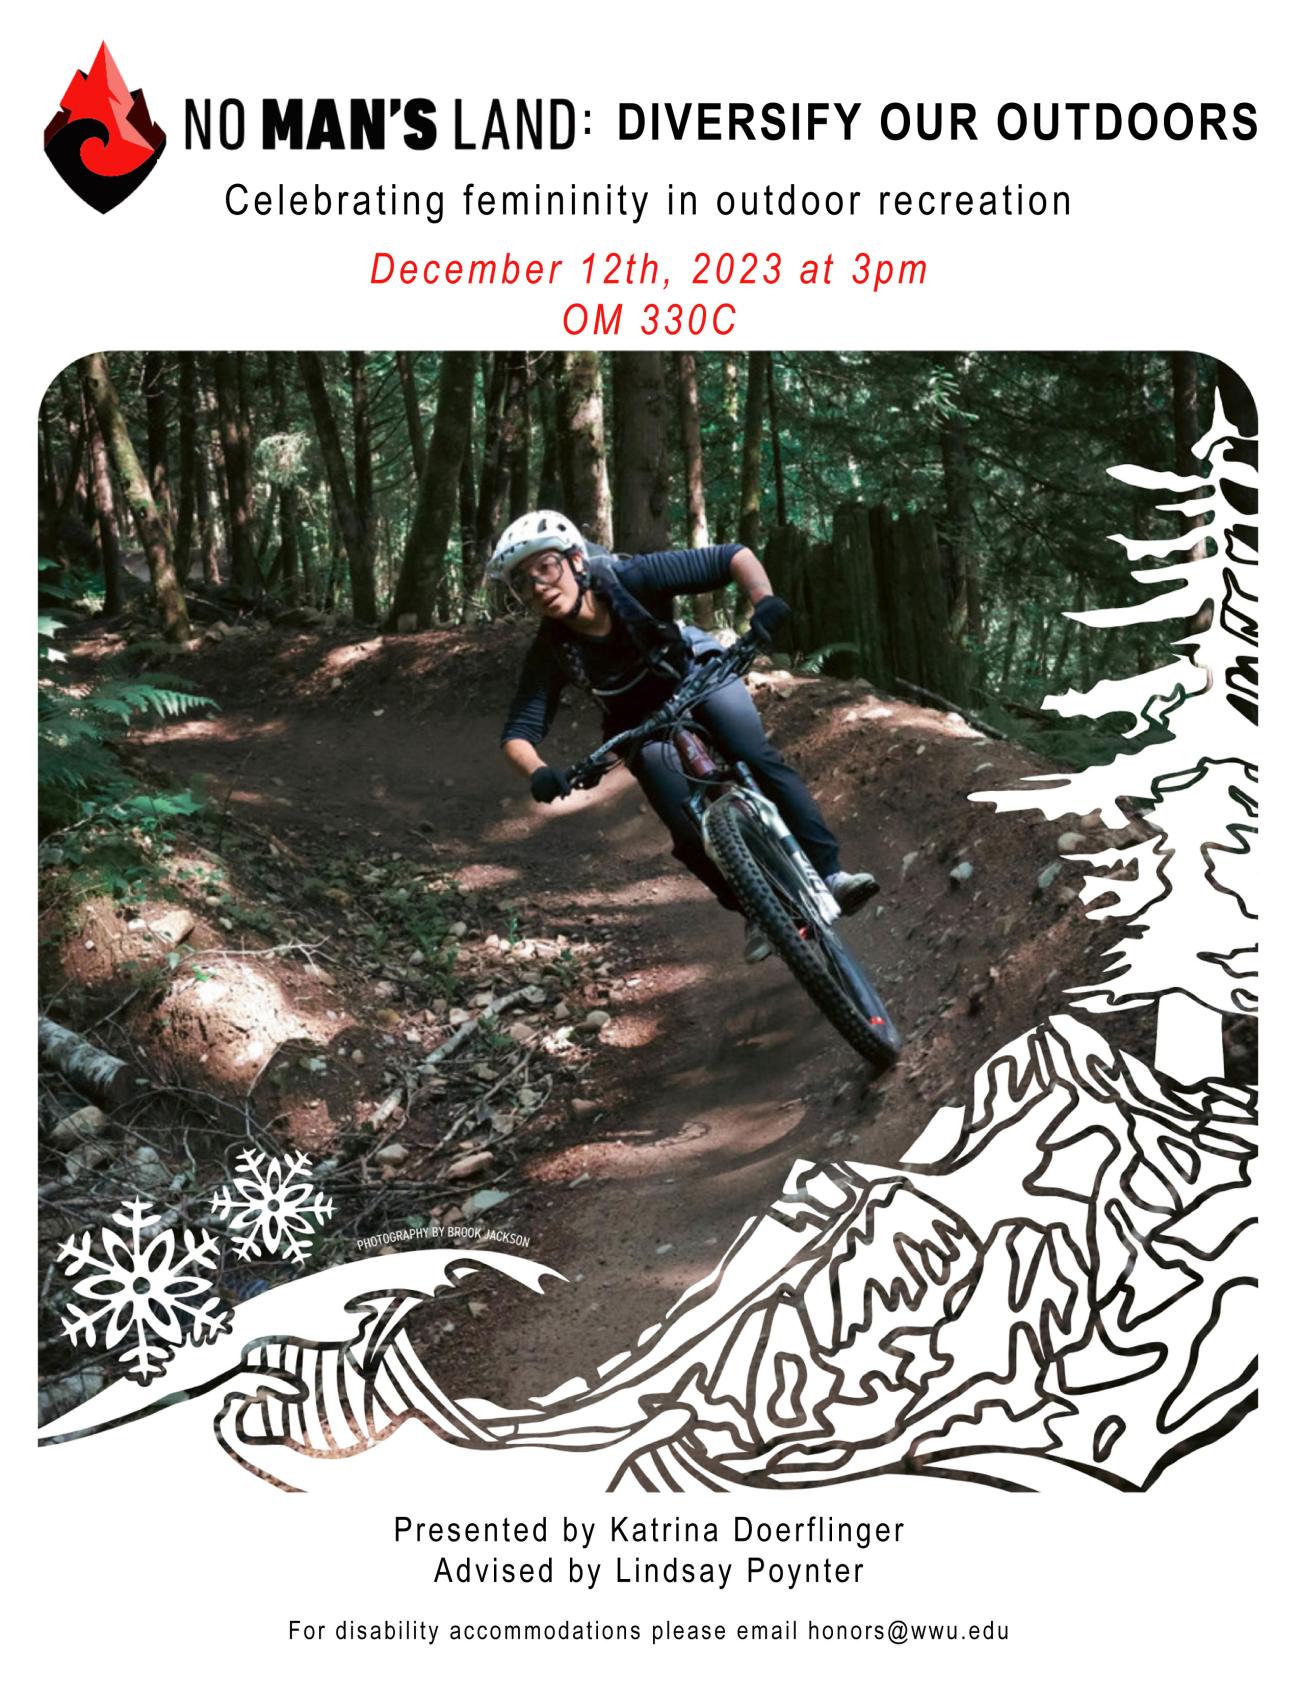 A white poster with an image in the center of a woman mountain biking framed by white illustrations of trees, mountains, and a wave. Above the image the text reads, "No Man's Land: Diversify Our Outdoors. Celebrating femininity in outdoor recreation. December 12th, 2023 at 3pm. OM 330C." Below the image the text reads, "Presented by Katrina Doerflinger, Advised by Lindsay Poynter, For disability accommodations please email honors@wwu.edu."